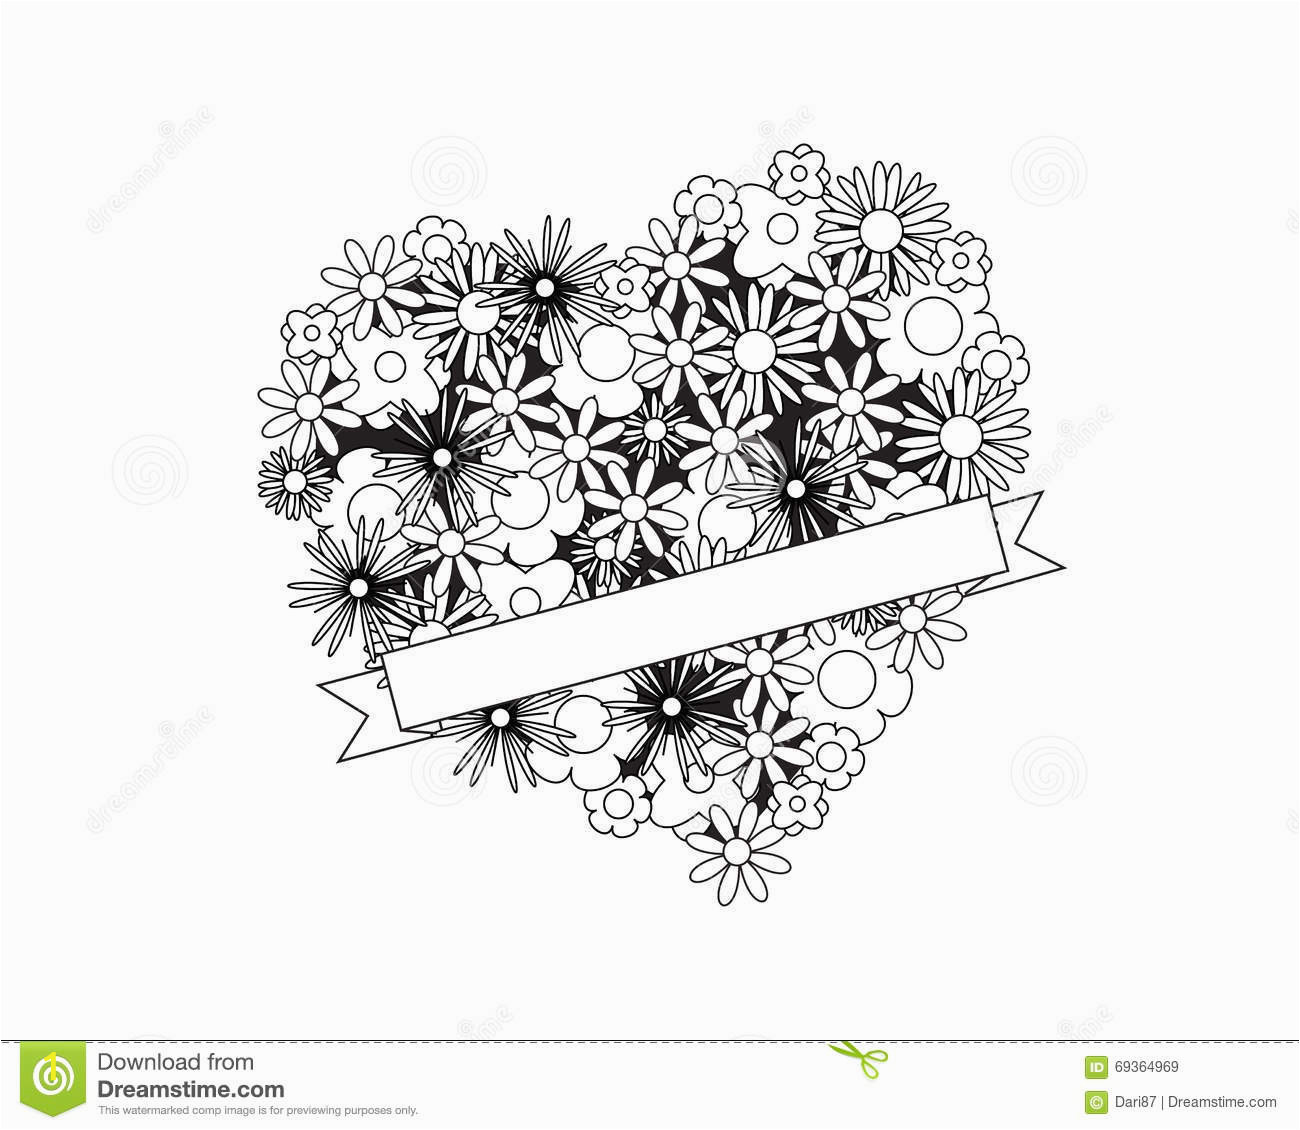 Rainbow Flag Coloring Page Color Me Heart with Flowers and Ribbon Stock Vector